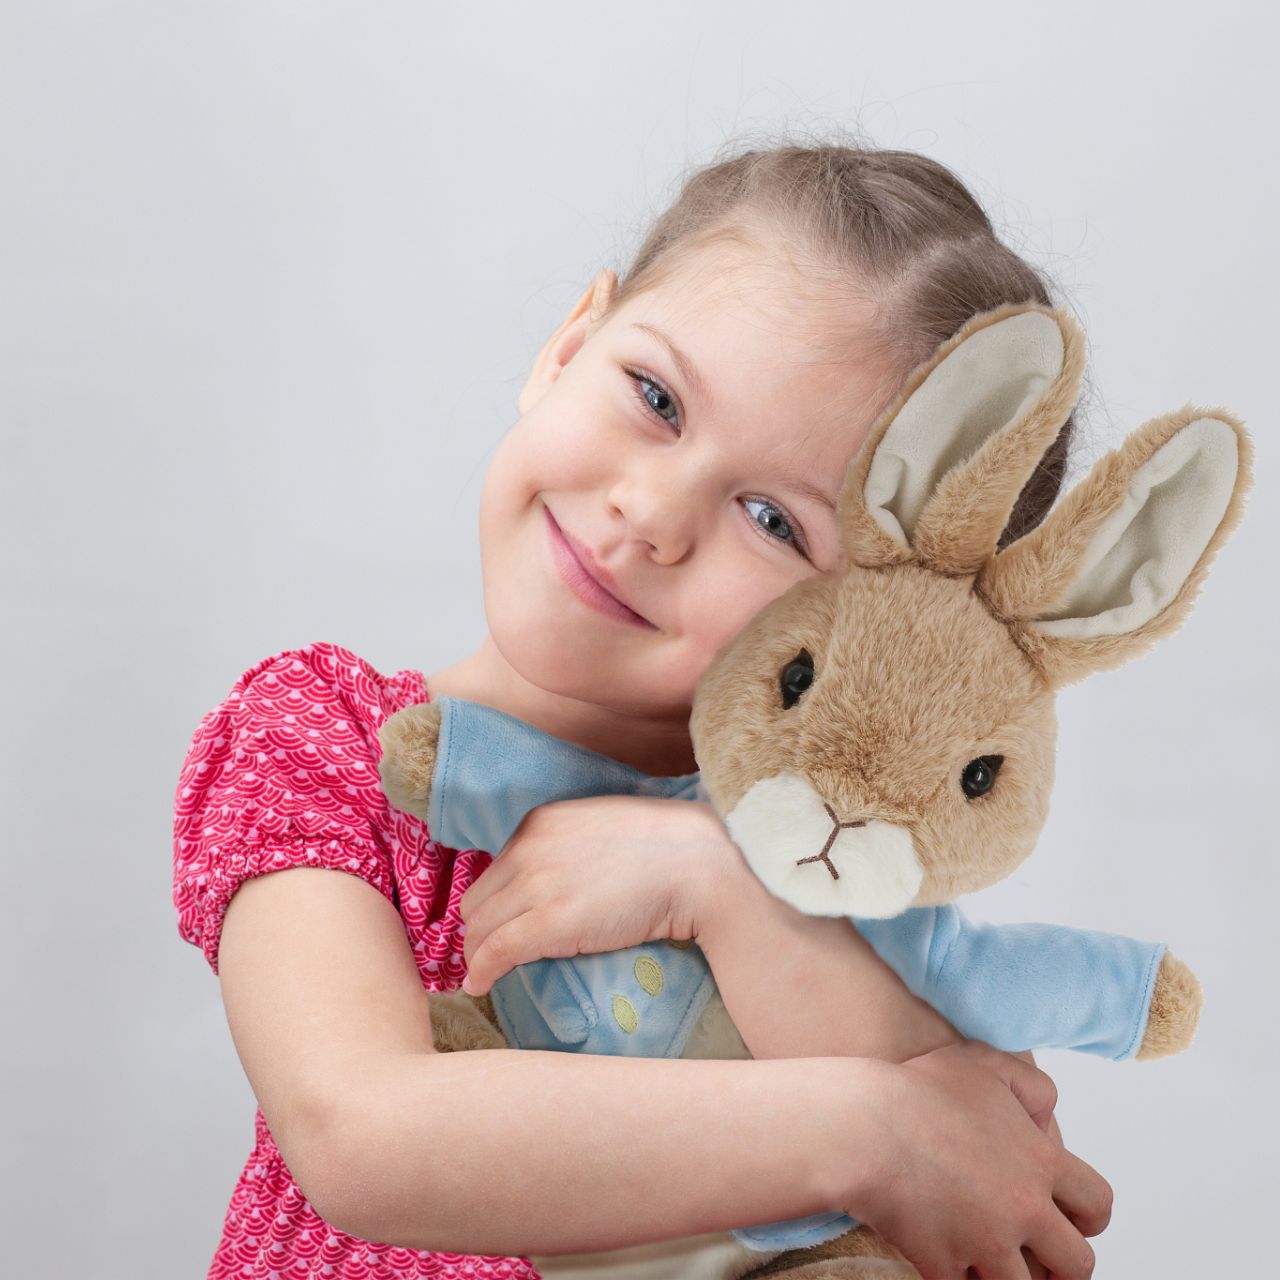 This Extra Large Peter Rabbit soft toy is even more huggable than the last. Peter Rabbit has been made from beautifully soft fabric and has been dressed in clothing exactly as illustrated by Beatrix Potter, with his signature blue jacket.